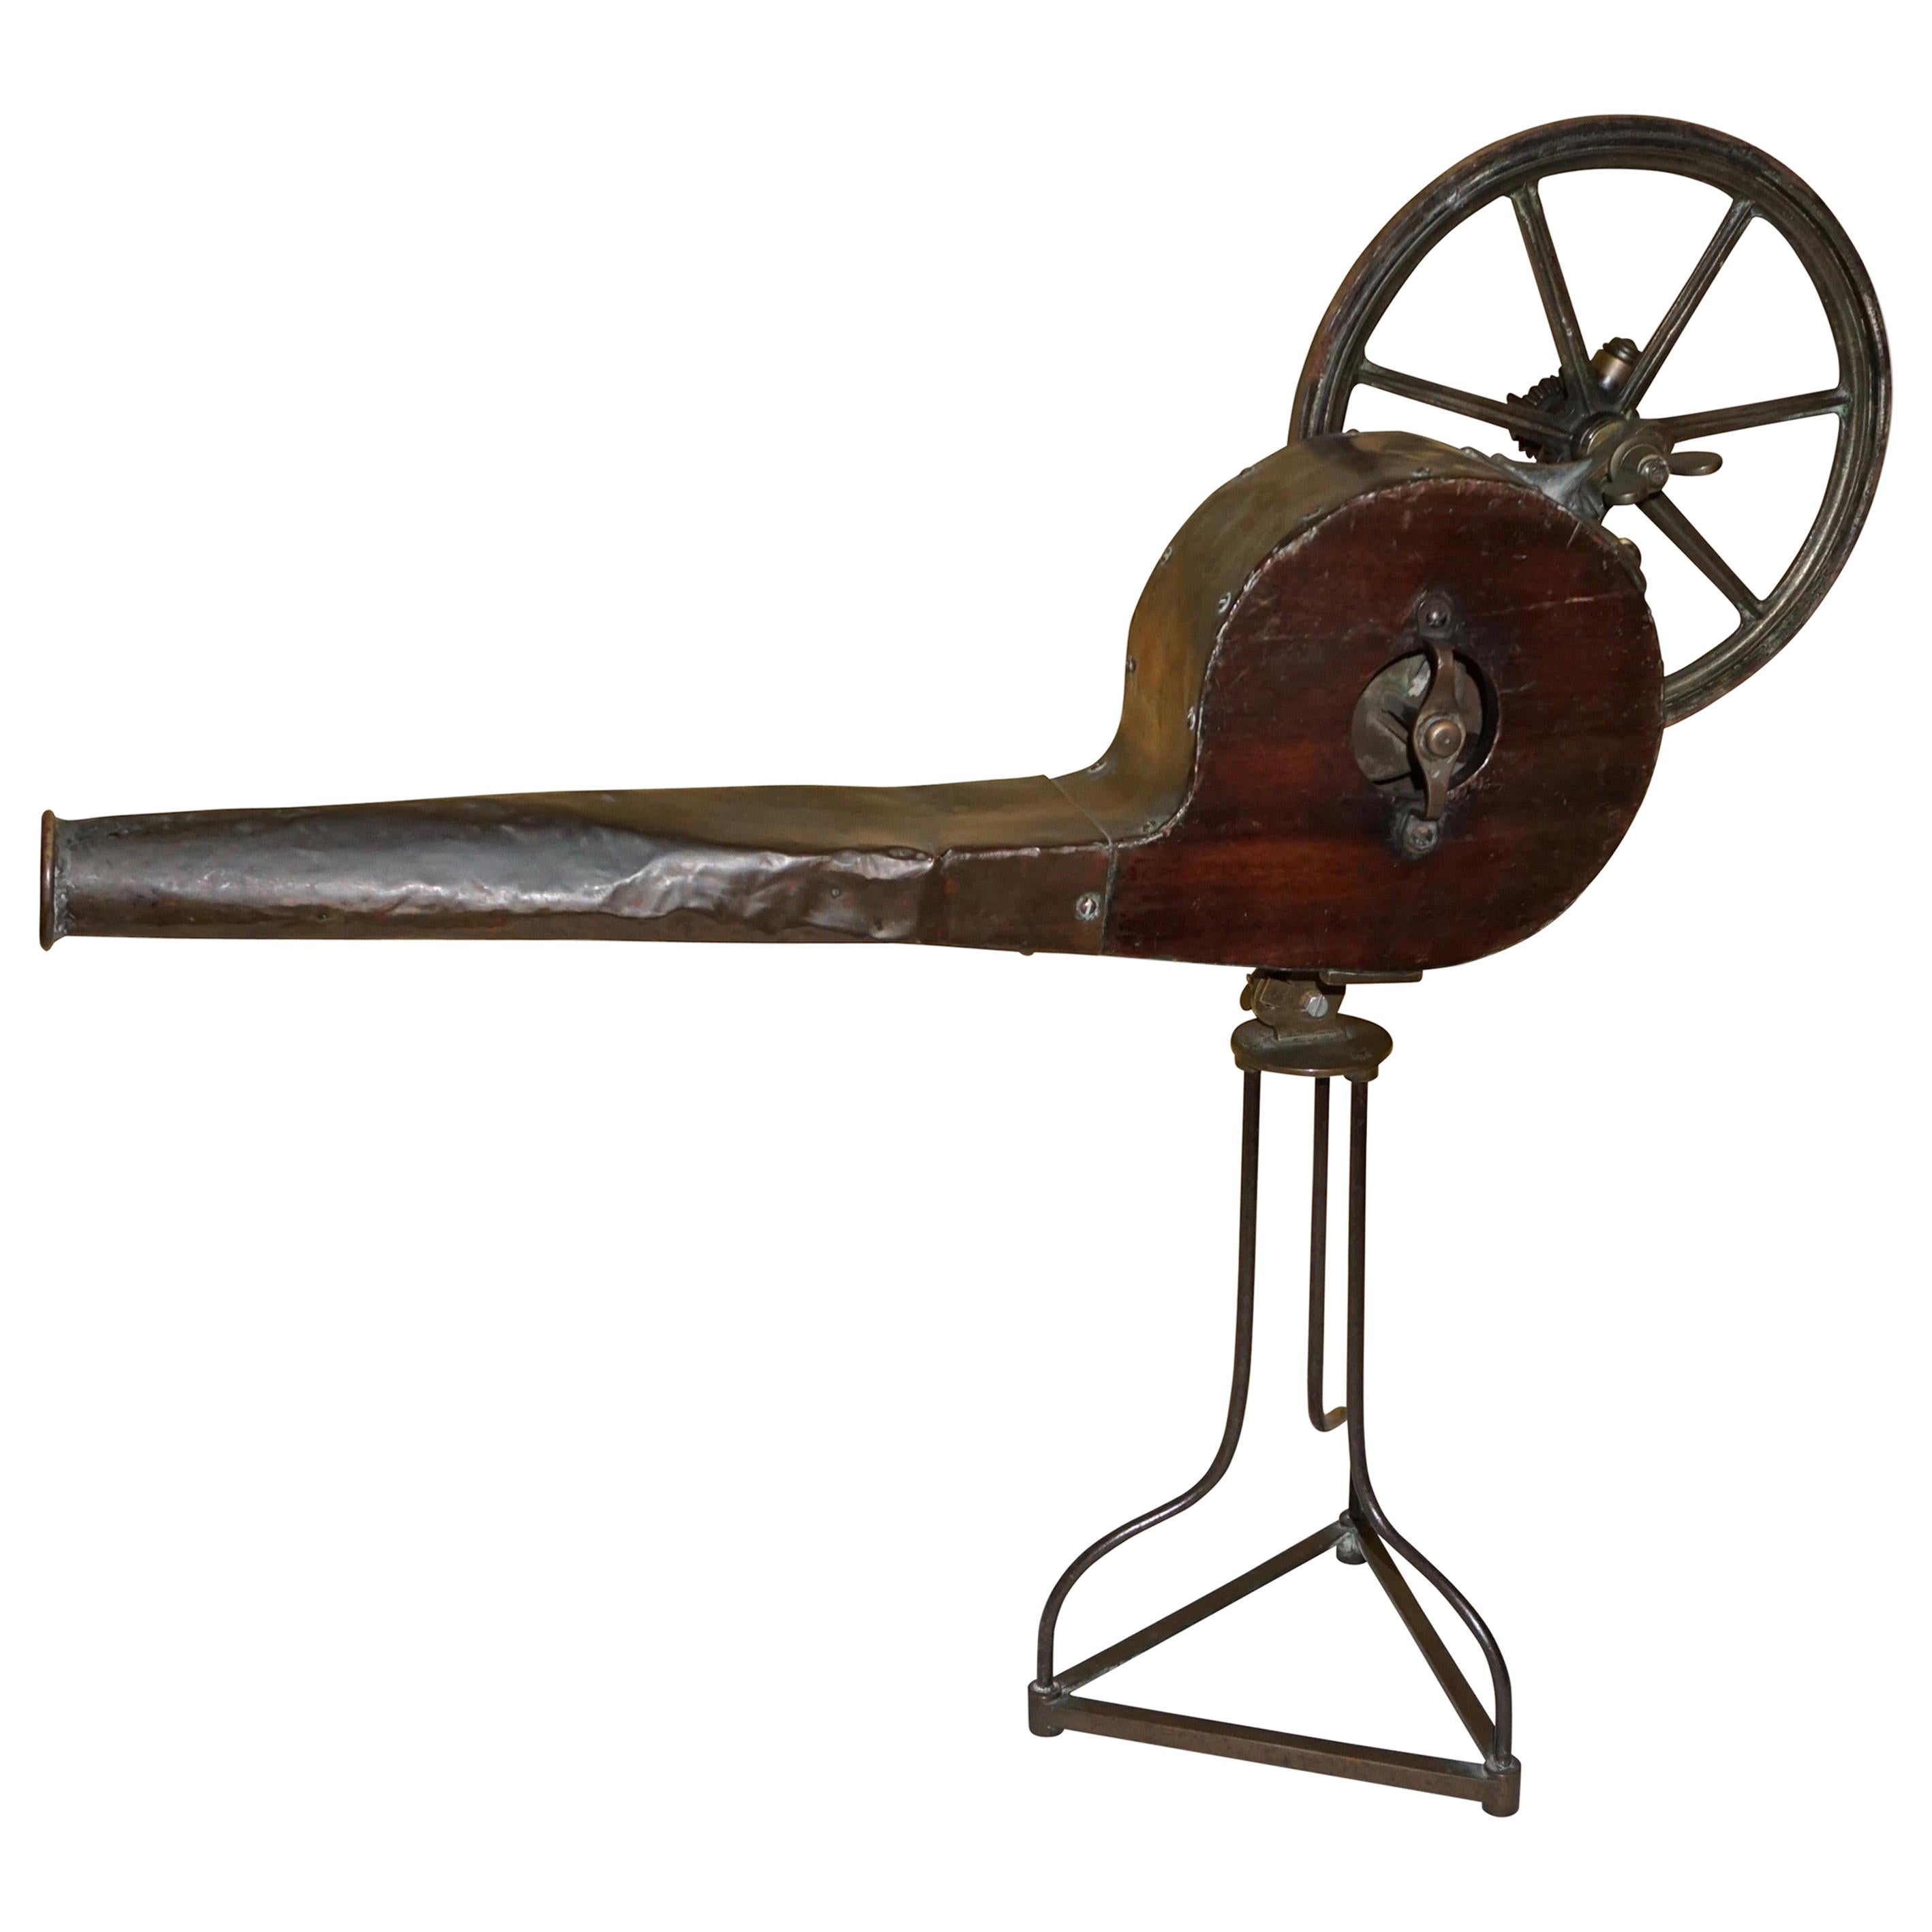 English Nineteenth Century Mahogany and Brass Mechanical Bellows For Sale